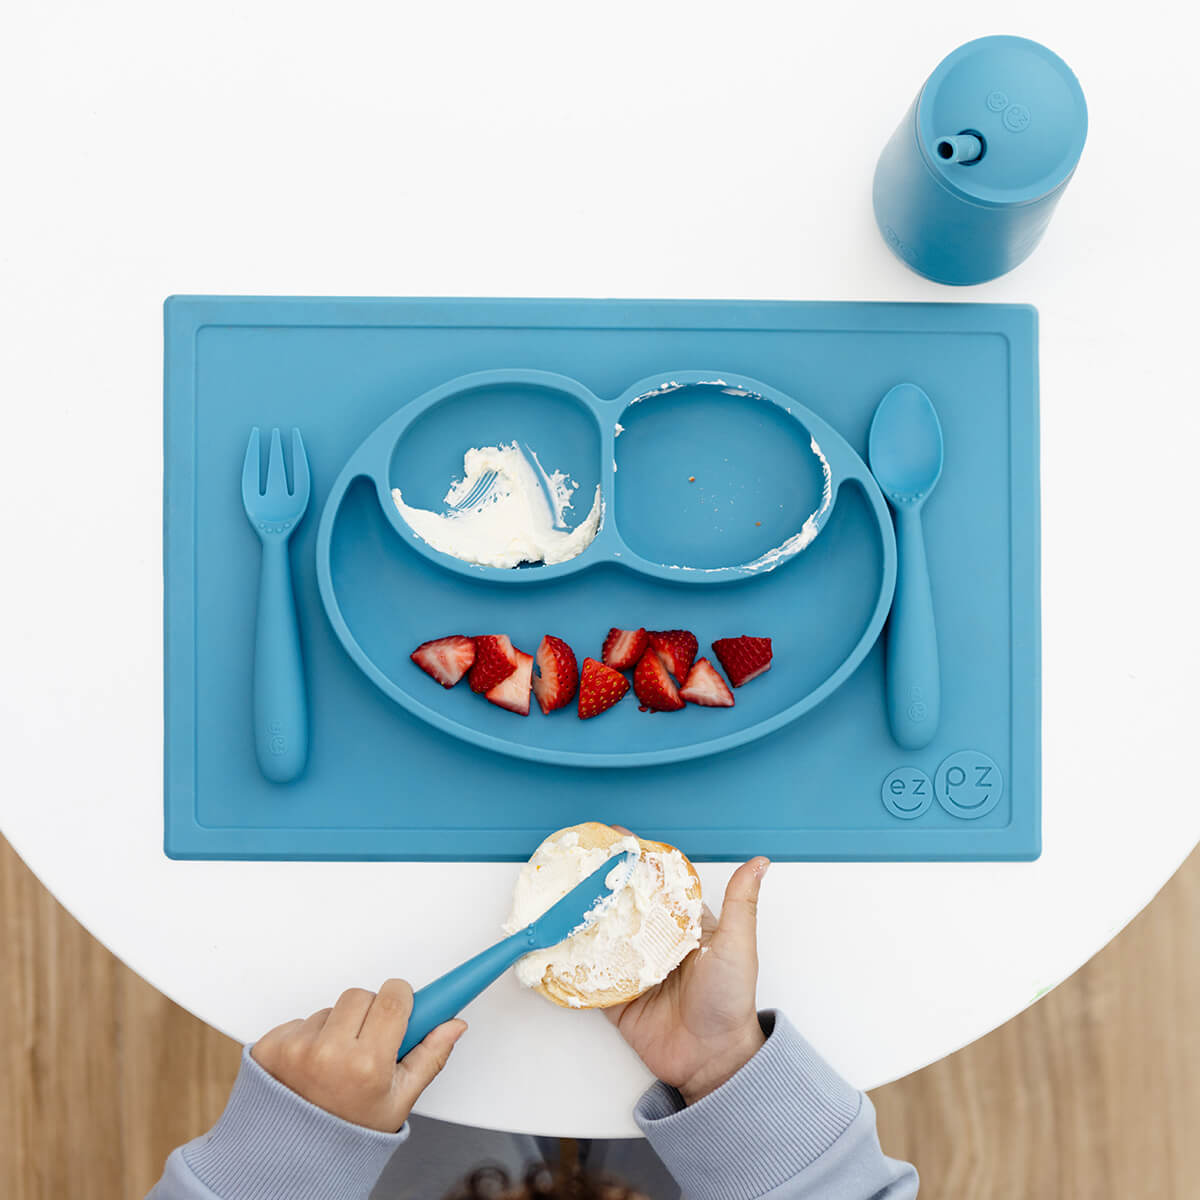 ezpz Happy Feeding Set in Blue / Silicone, Self-Suctioning Plate, Silicone Cup and Straw, Training Utensils for Toddlers